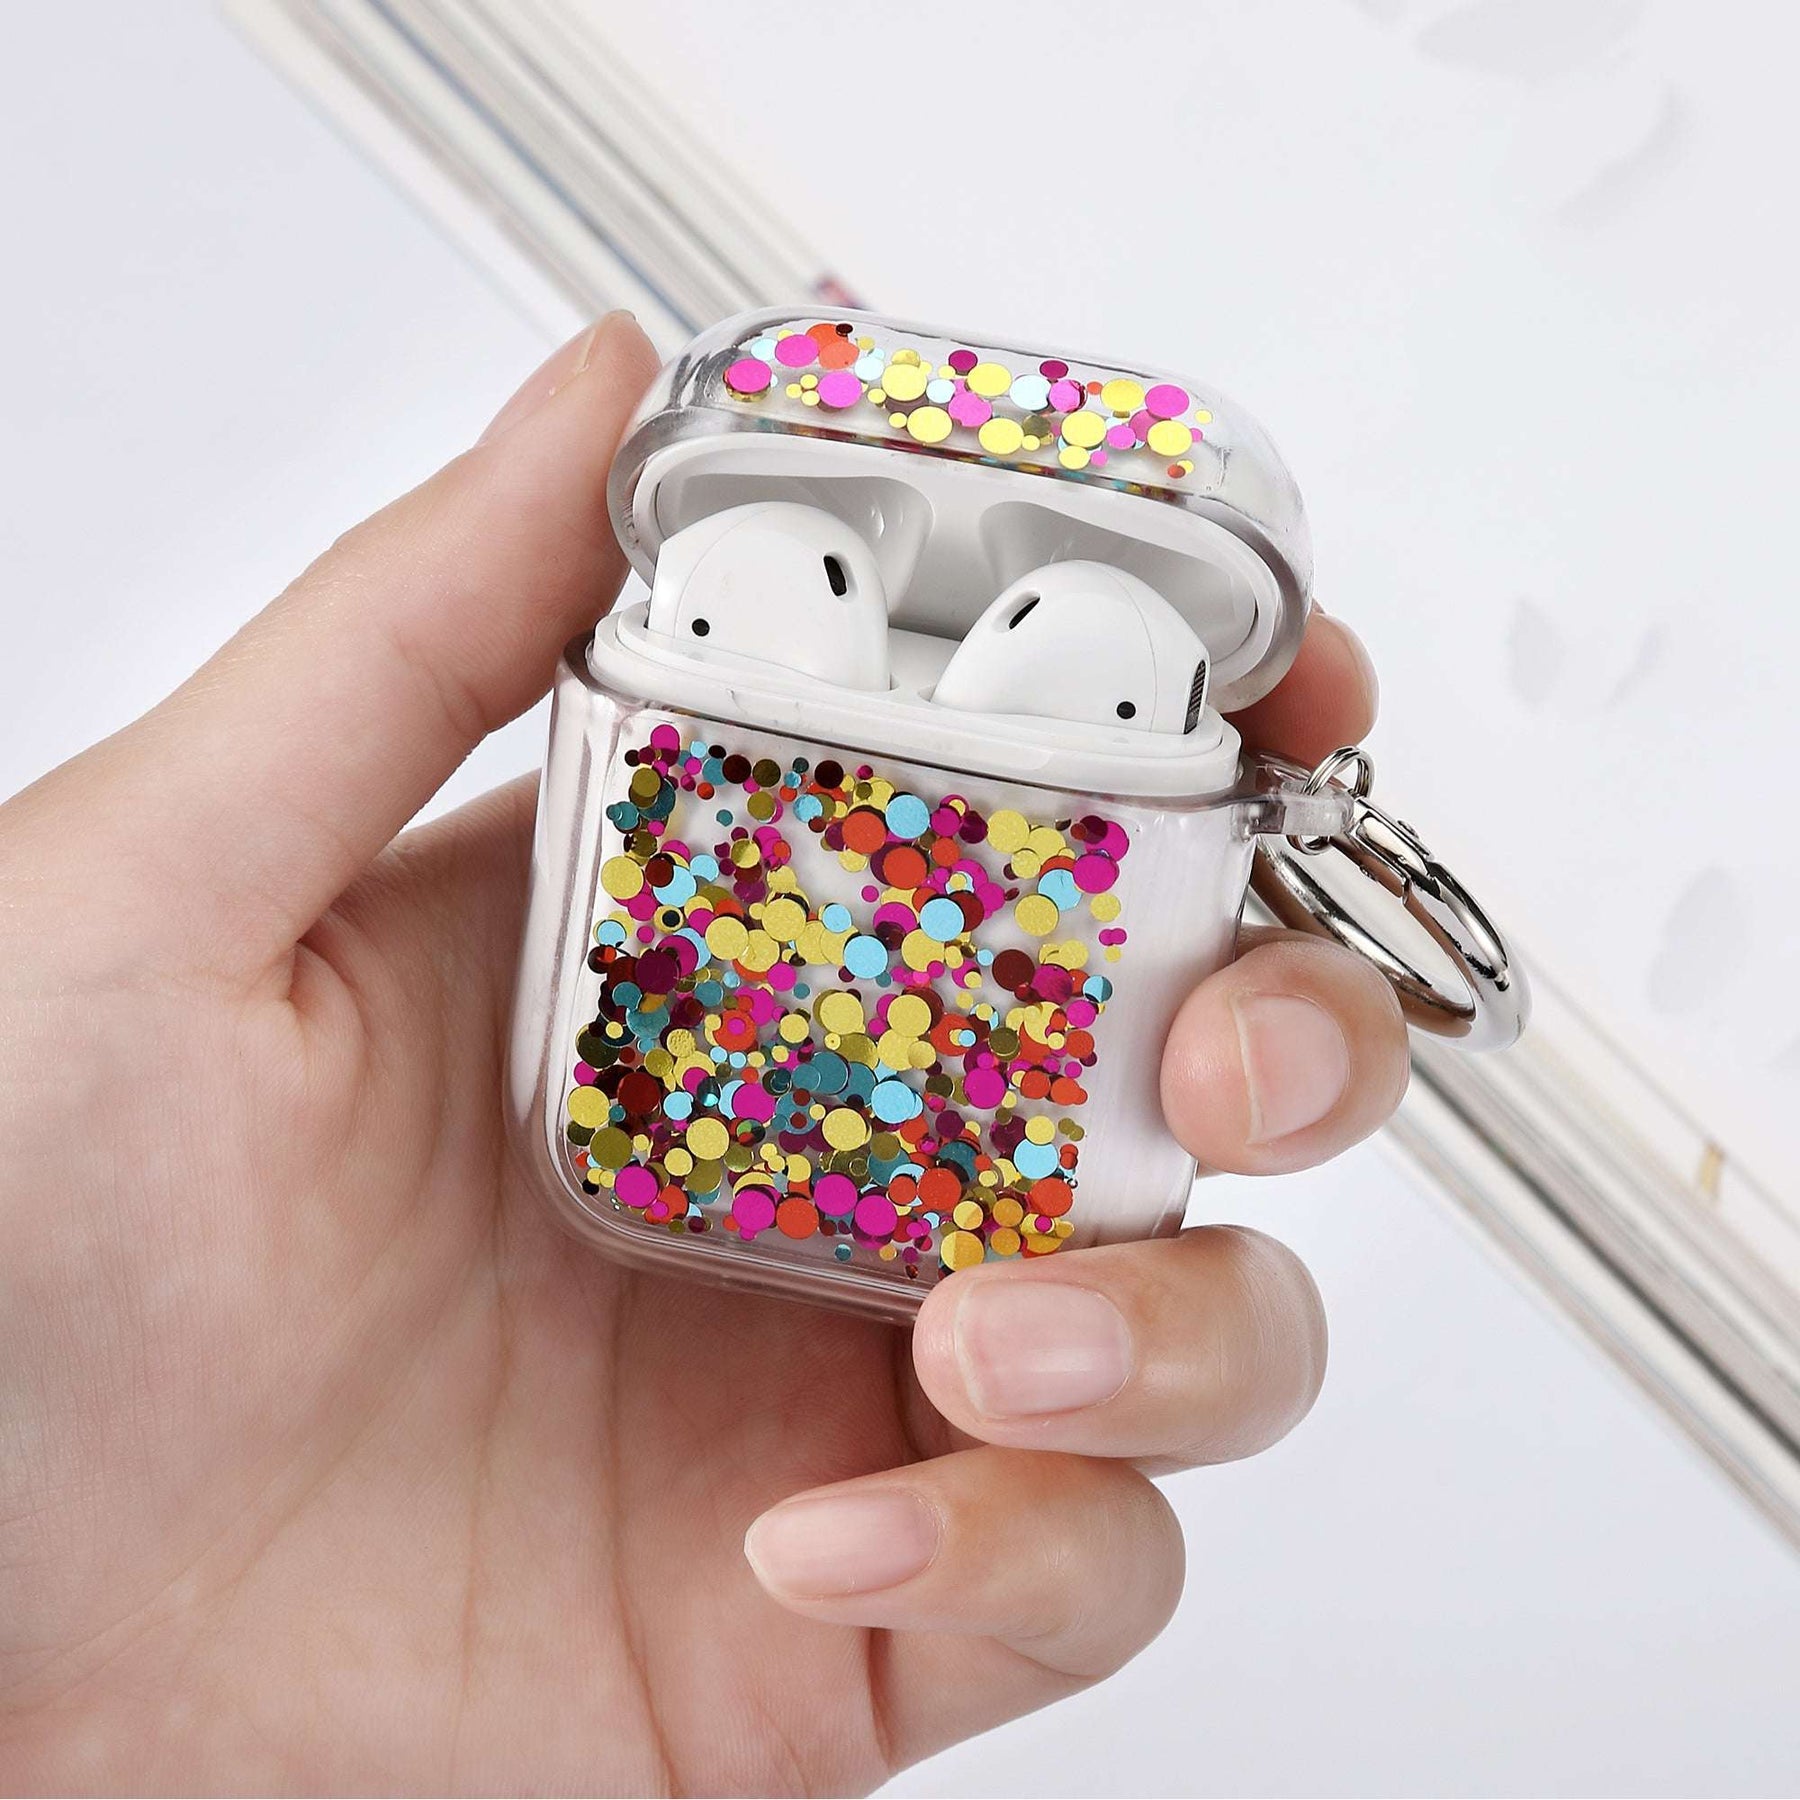 Protective Glitter Cases for Apple Airpods (Gen 1&2)